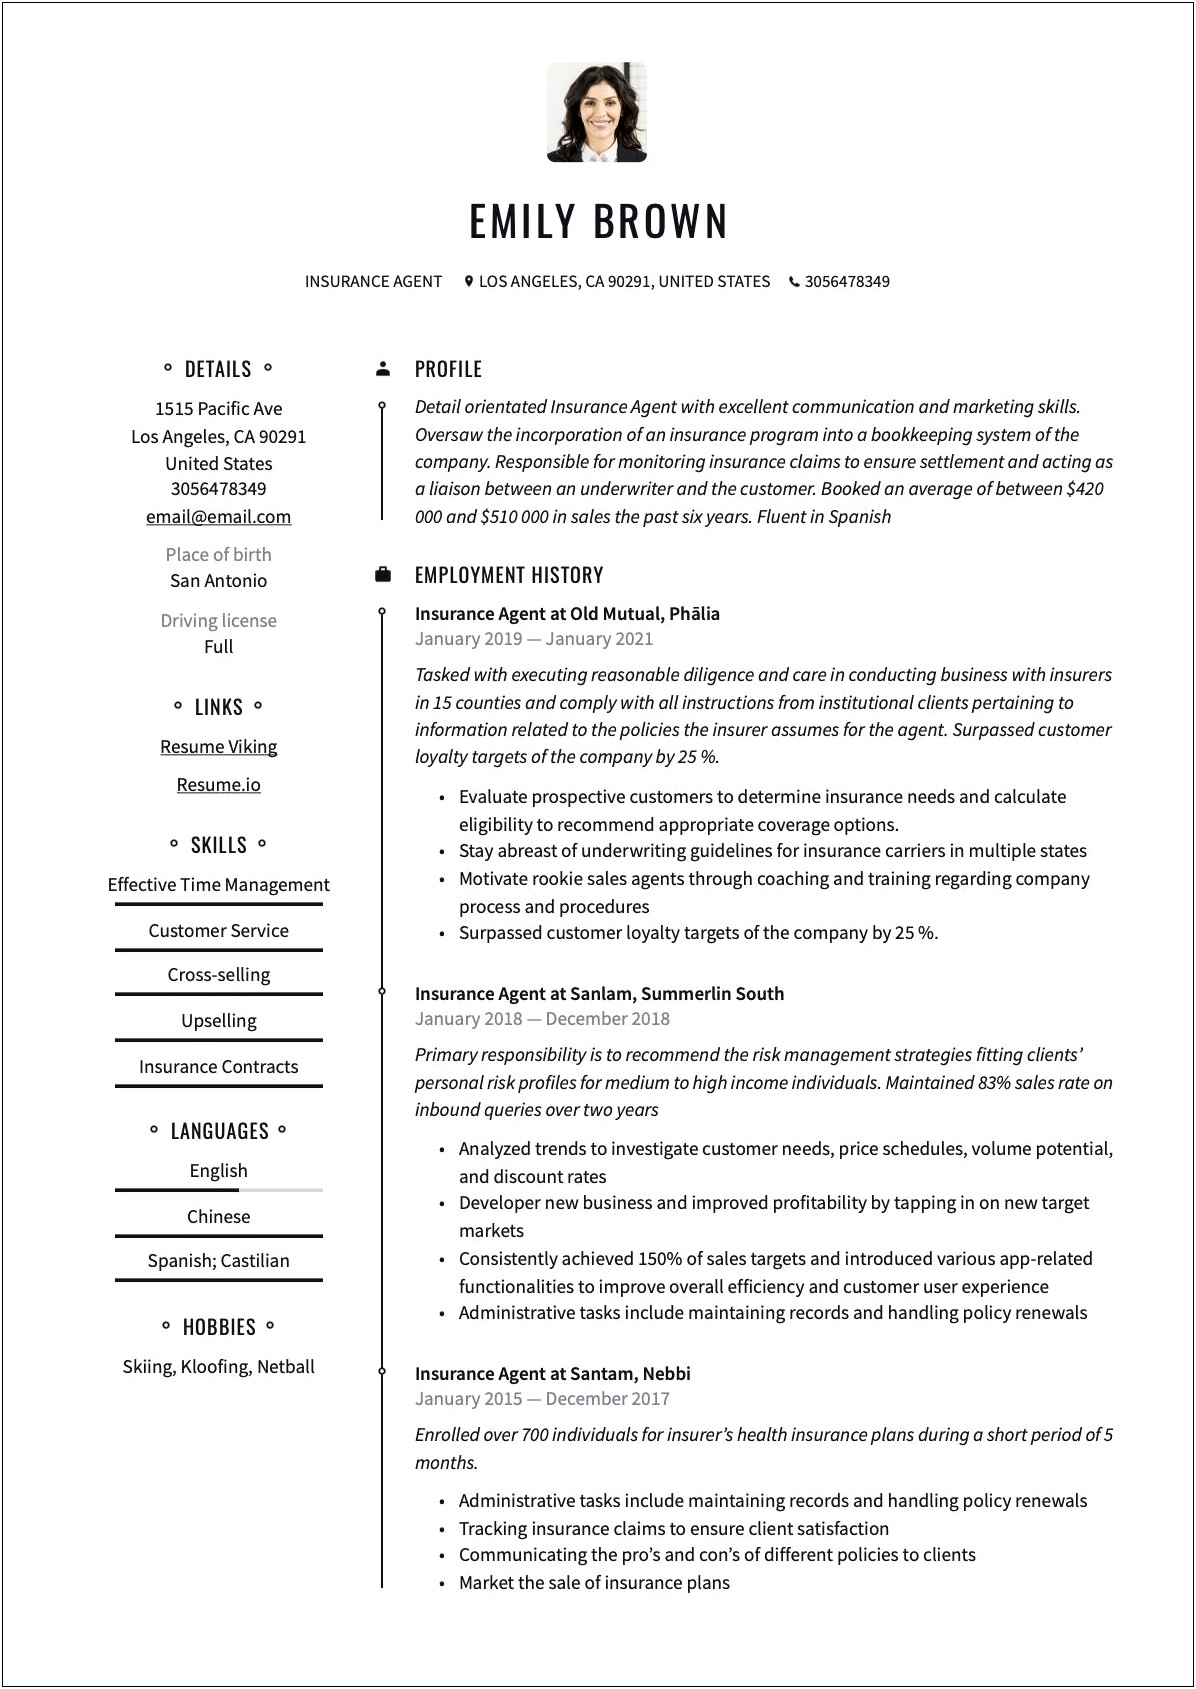 Examples Of Resumes For Insurance Jobs